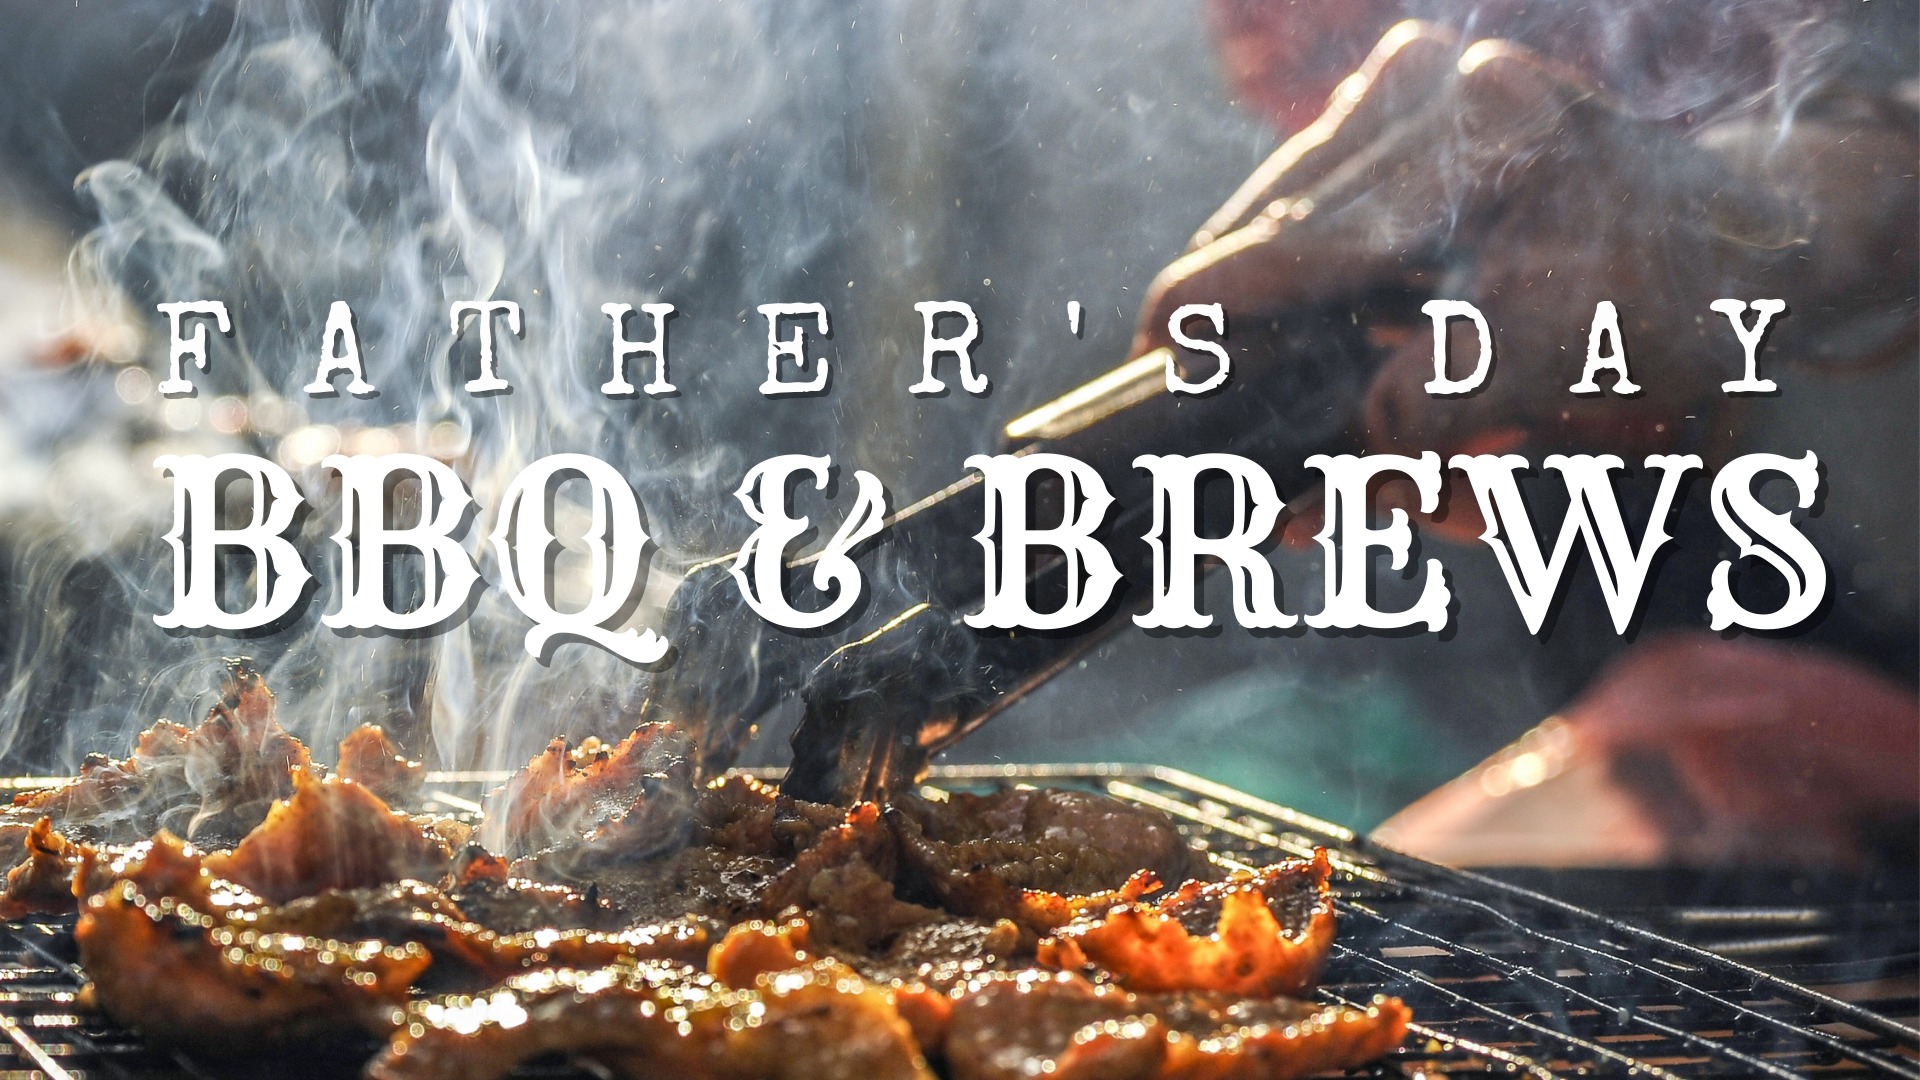 Father’s Day BBQ & Brews at 3 Daughters Brewing